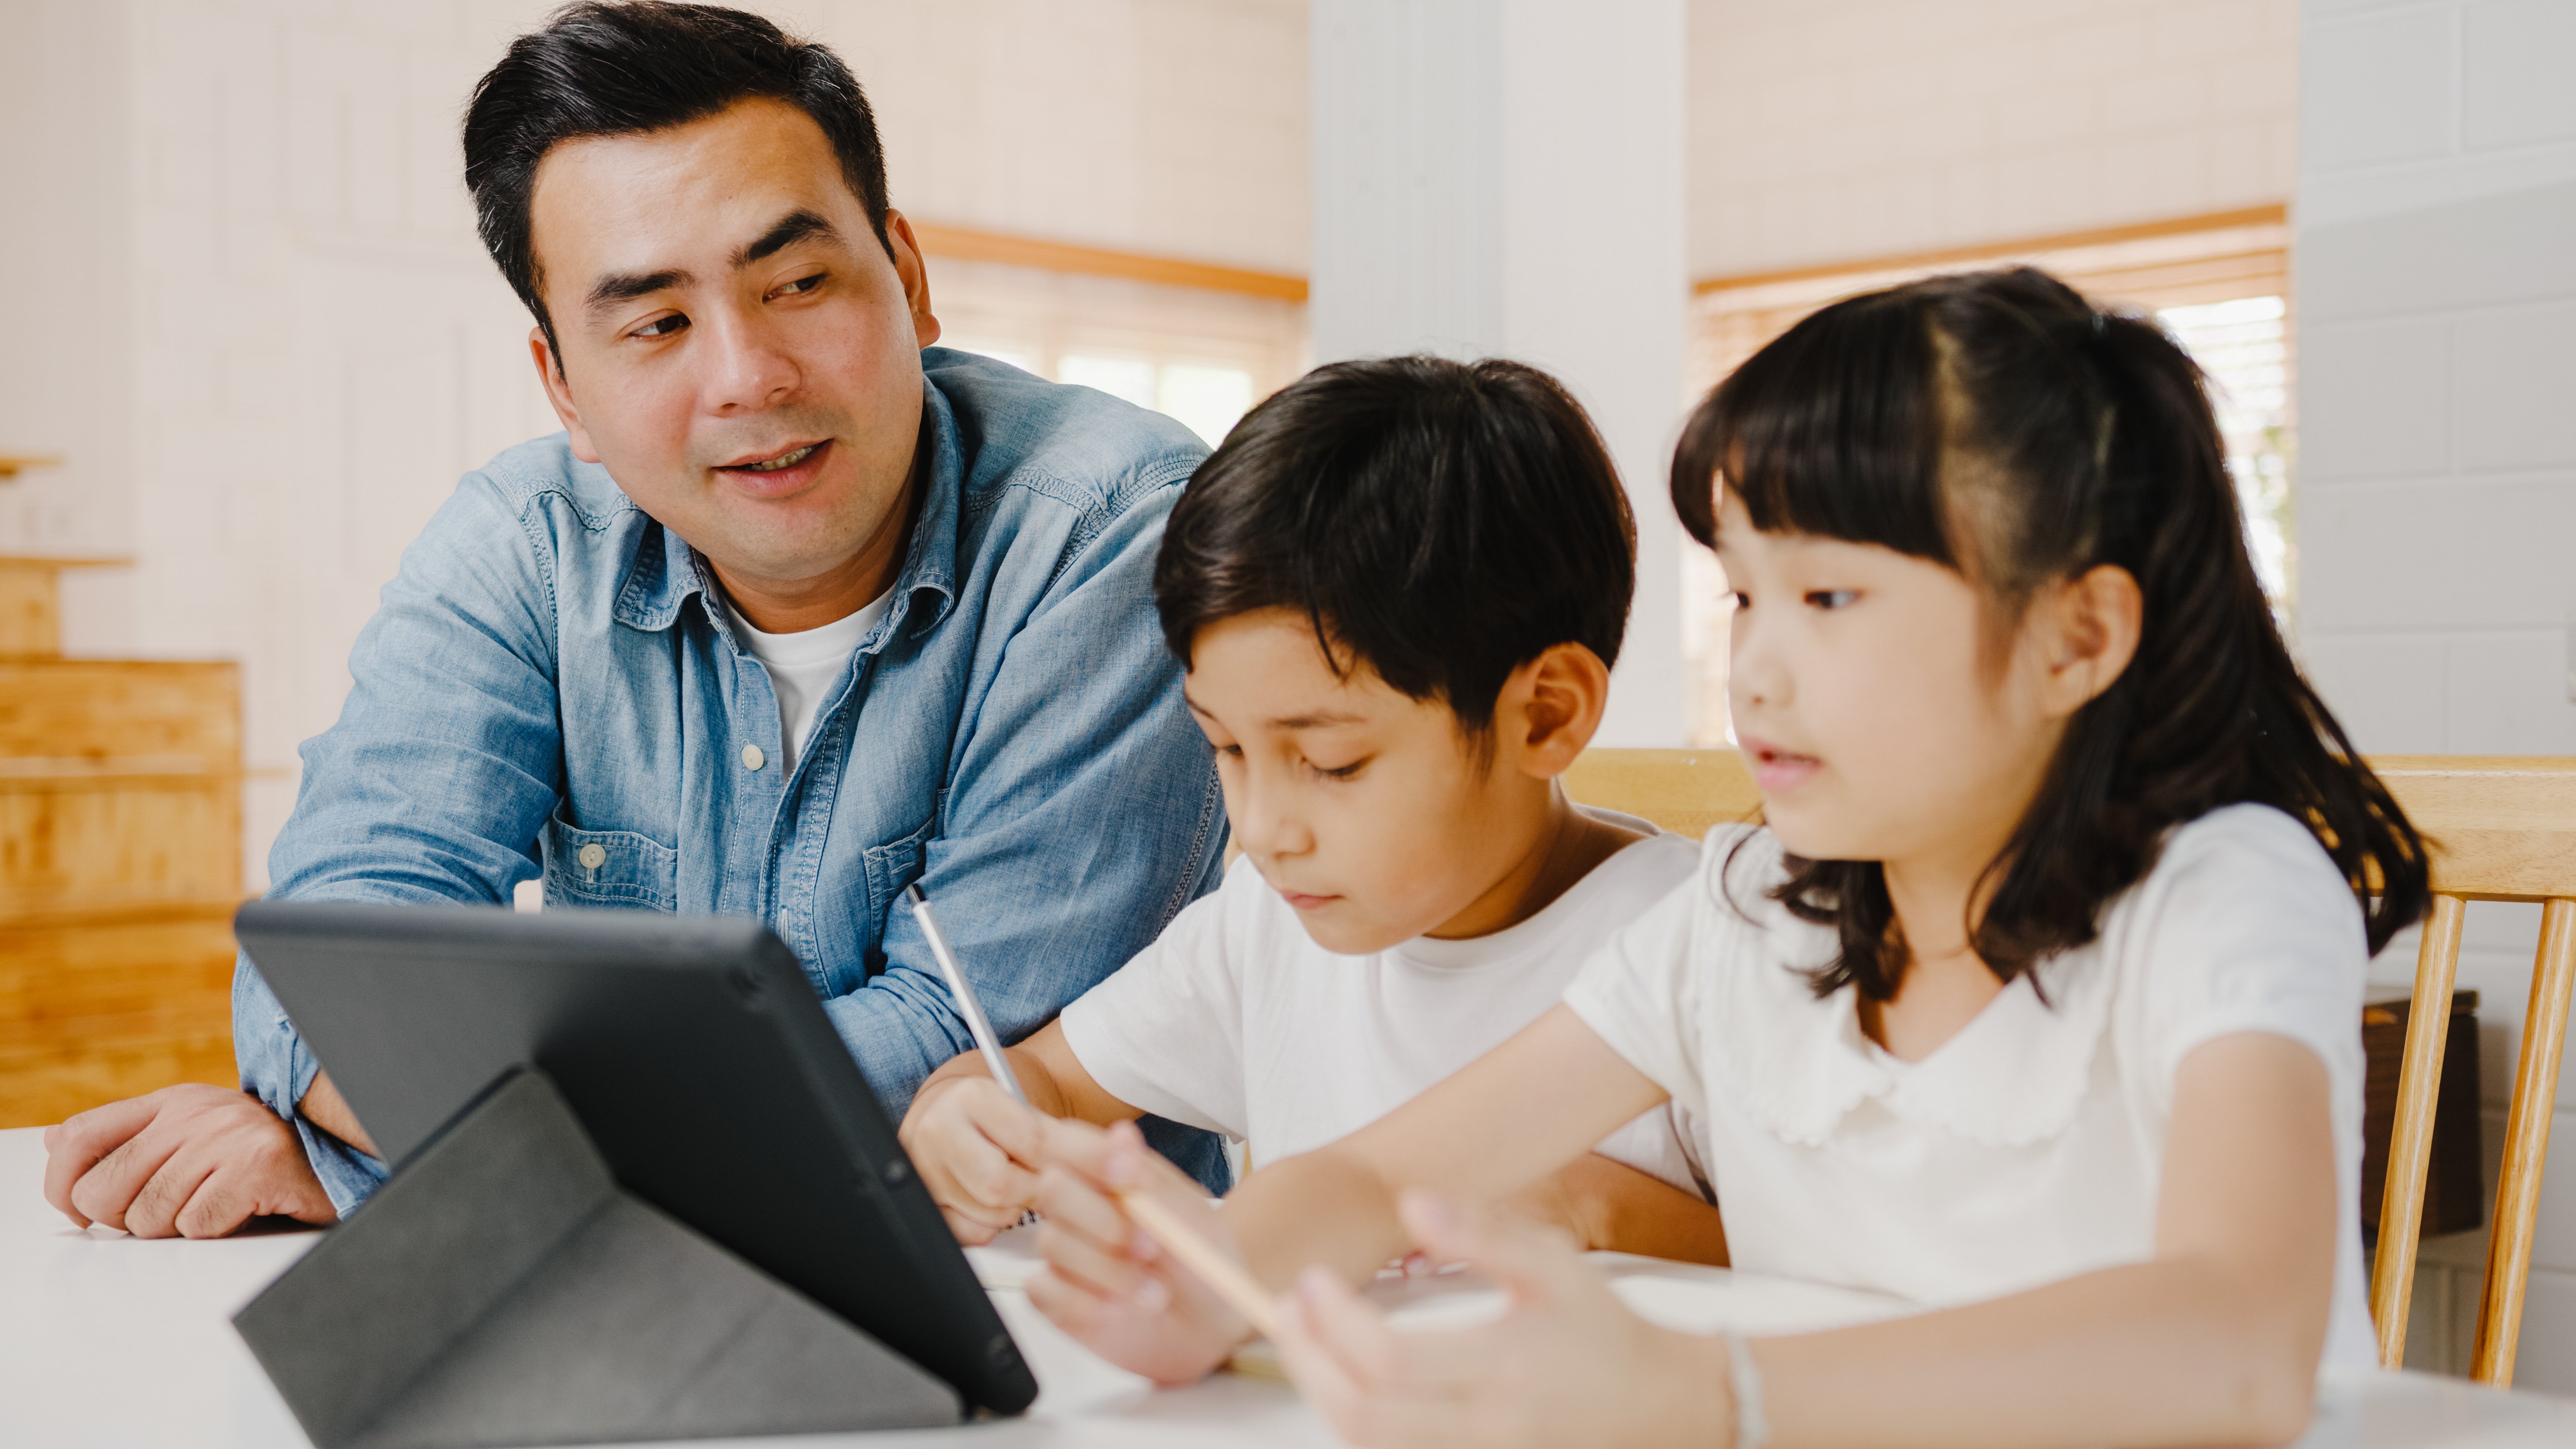 happy-asia-family-homeschooling-father-teach-children-using-digital-tablet-living-room-home-1